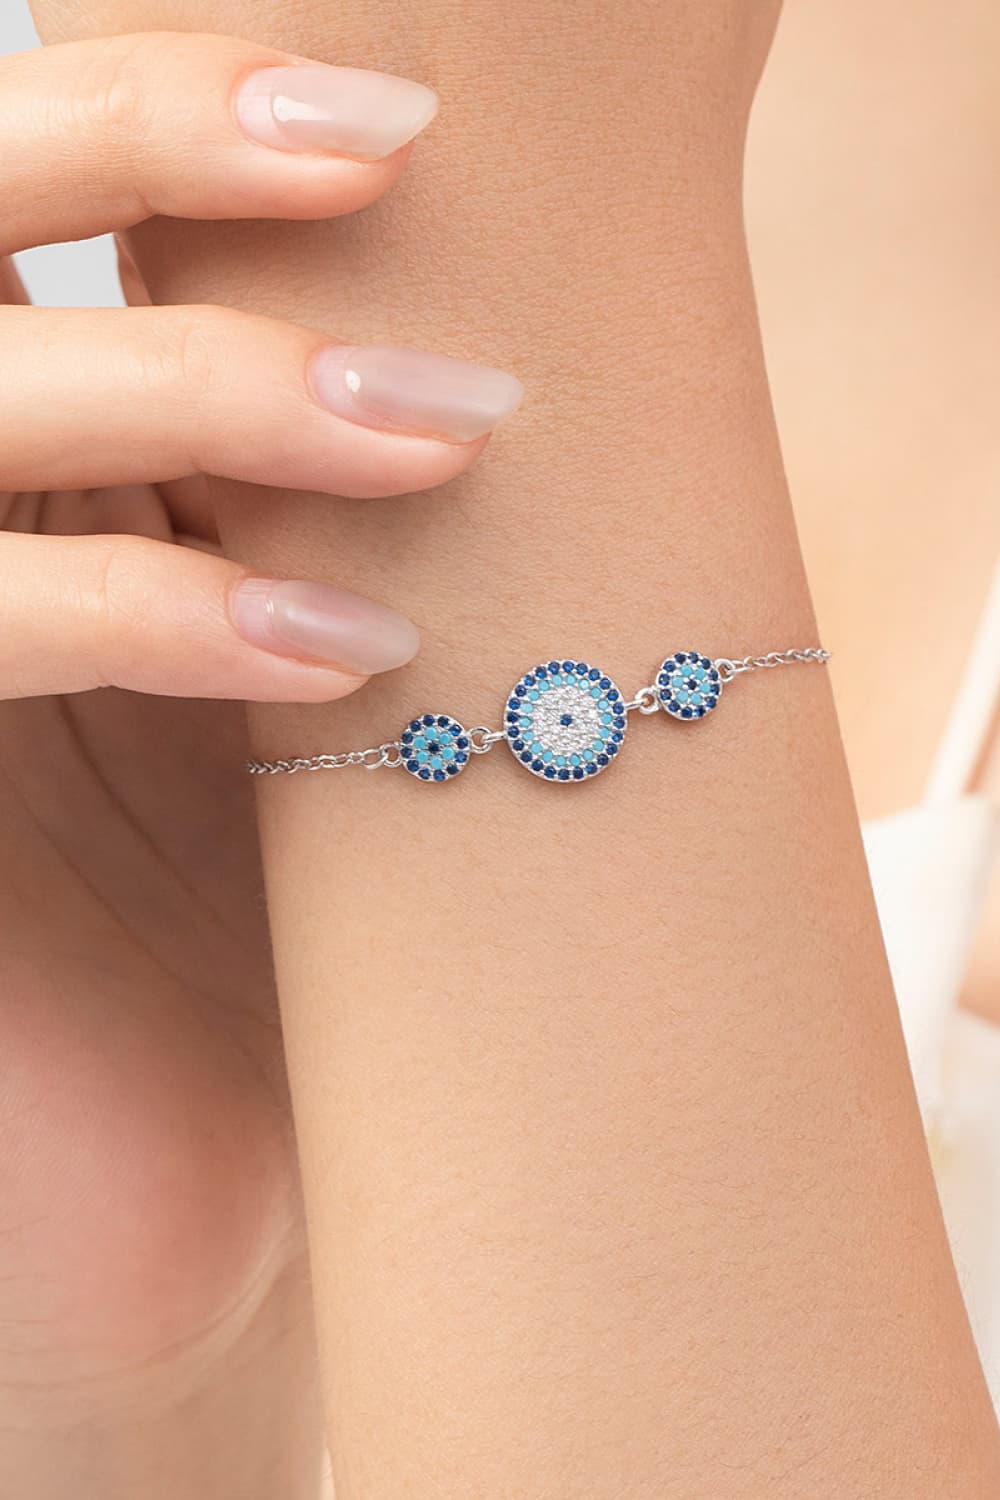 Evelia 925 Sterling Silver Artificial Turquoise Bracelet